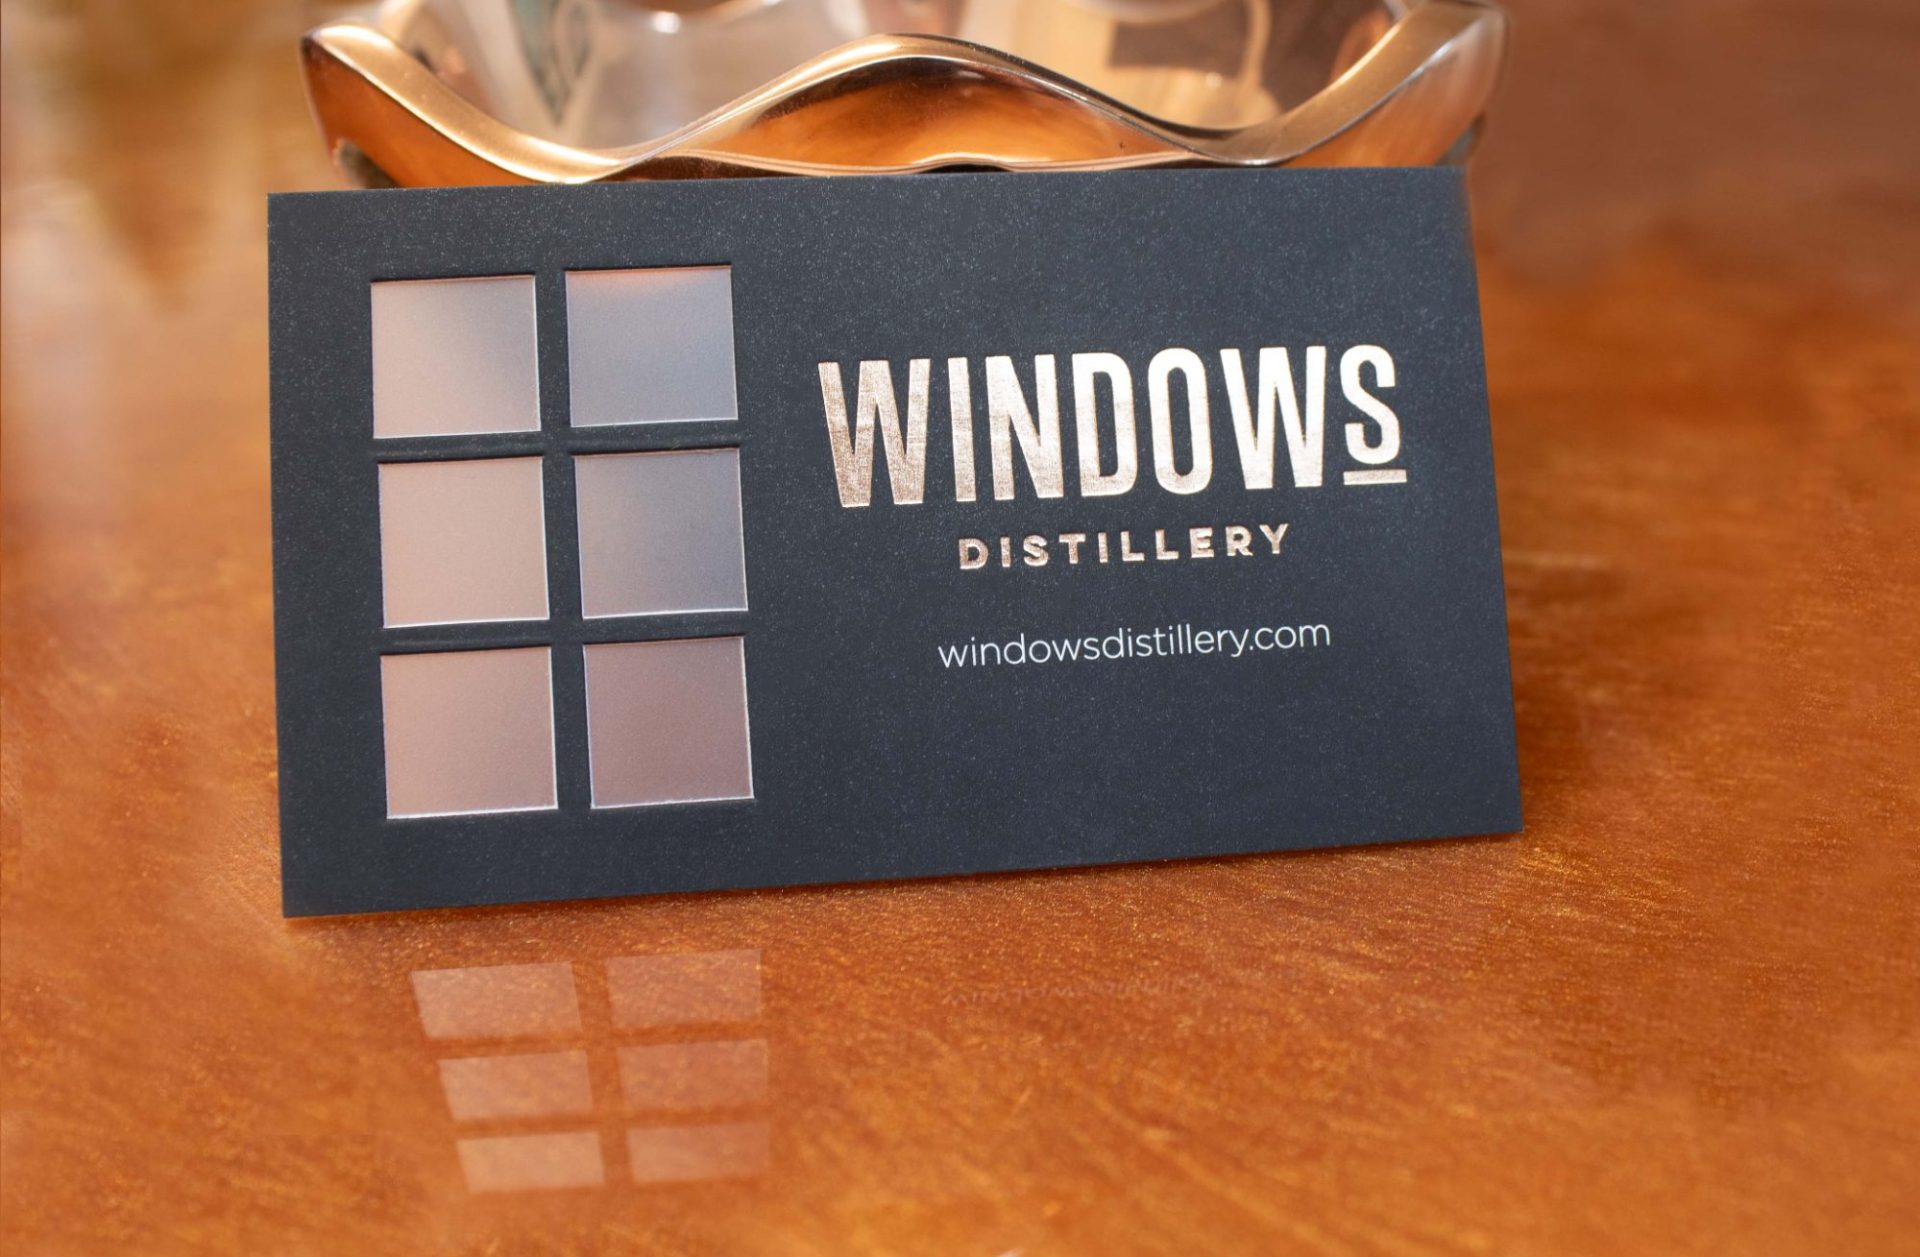 Windows Distillery business cards with vellum panes so light and objects can show through